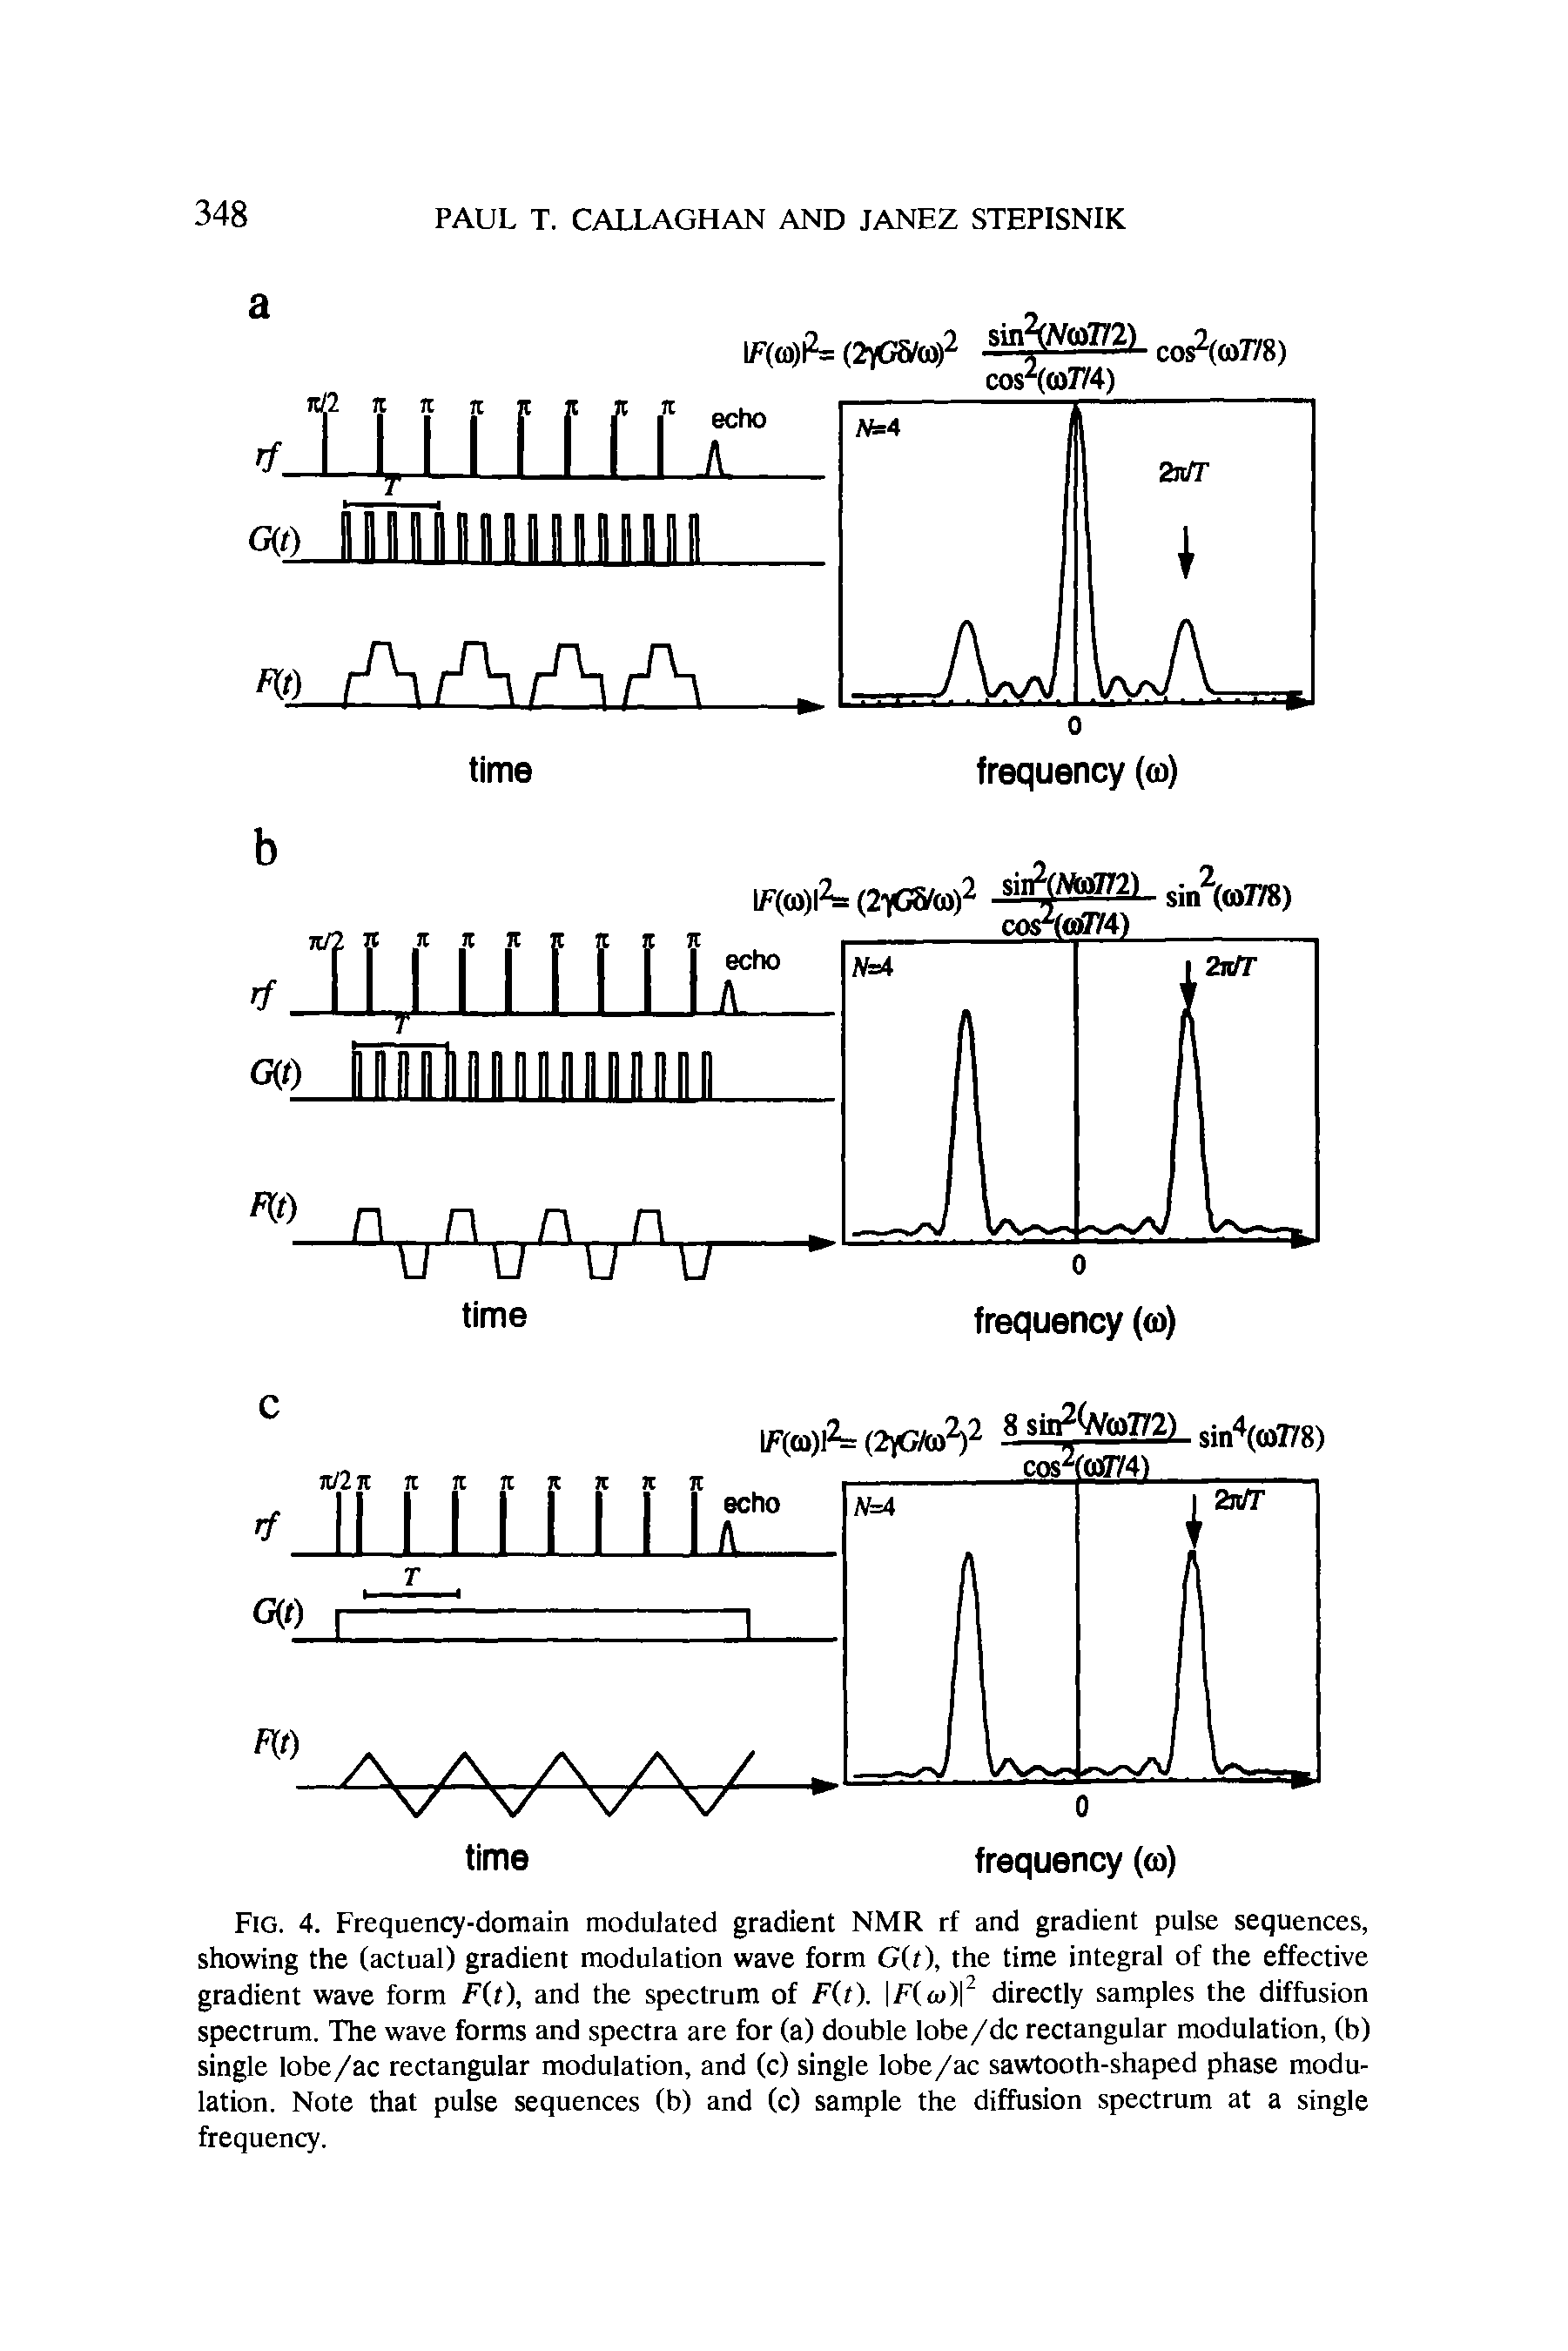 Fig. 4. Frequency-domain modulated gradient NMR rf and gradient pulse sequences, showing the (actual) gradient modulation wave form Git), the time integral of the effective gradient wave form Fit), and the spectrum of Fit). H )P directly samples the diffusion spectrum. The wave forms and spectra are for (a) double lobe/dc rectangular modulation, (b) single lobe/ac rectangular modulation, and (c) single lobe/ac sawtooth-shaped phase modulation. Note that pulse sequences (b) and (c) sample the diffusion spectrum at a single frequency.